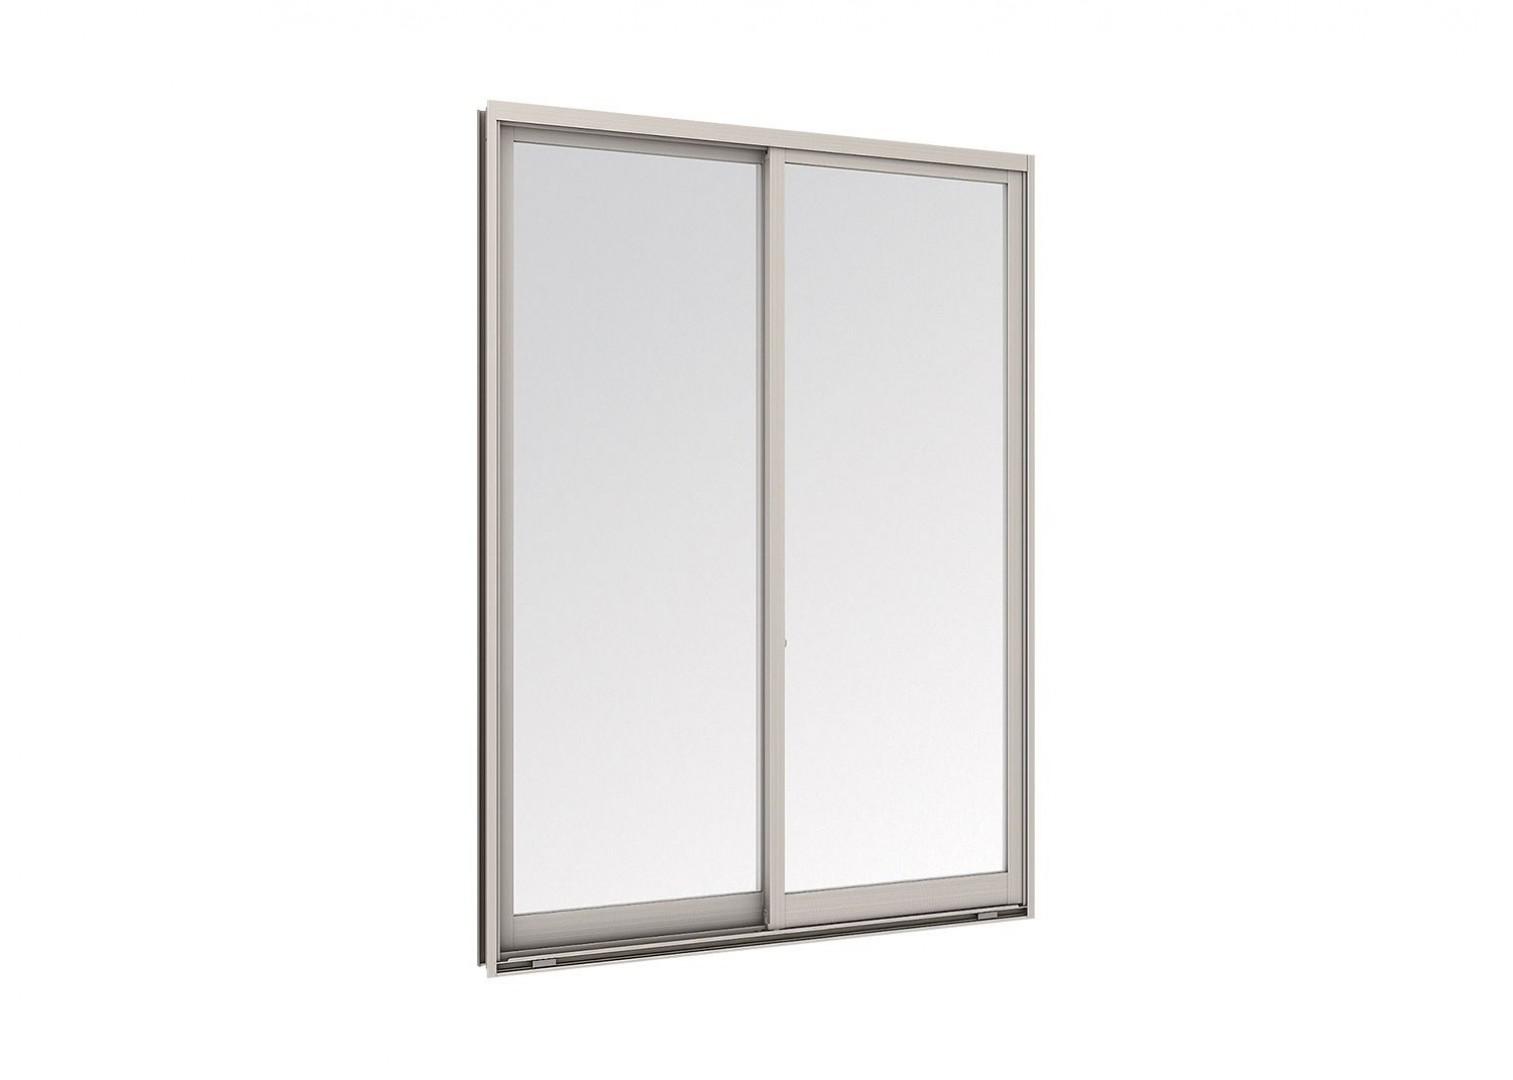 VIEW AND VIEW PLUS - Sliding Door 2 Panels on 2 Tracks from TOSTEM